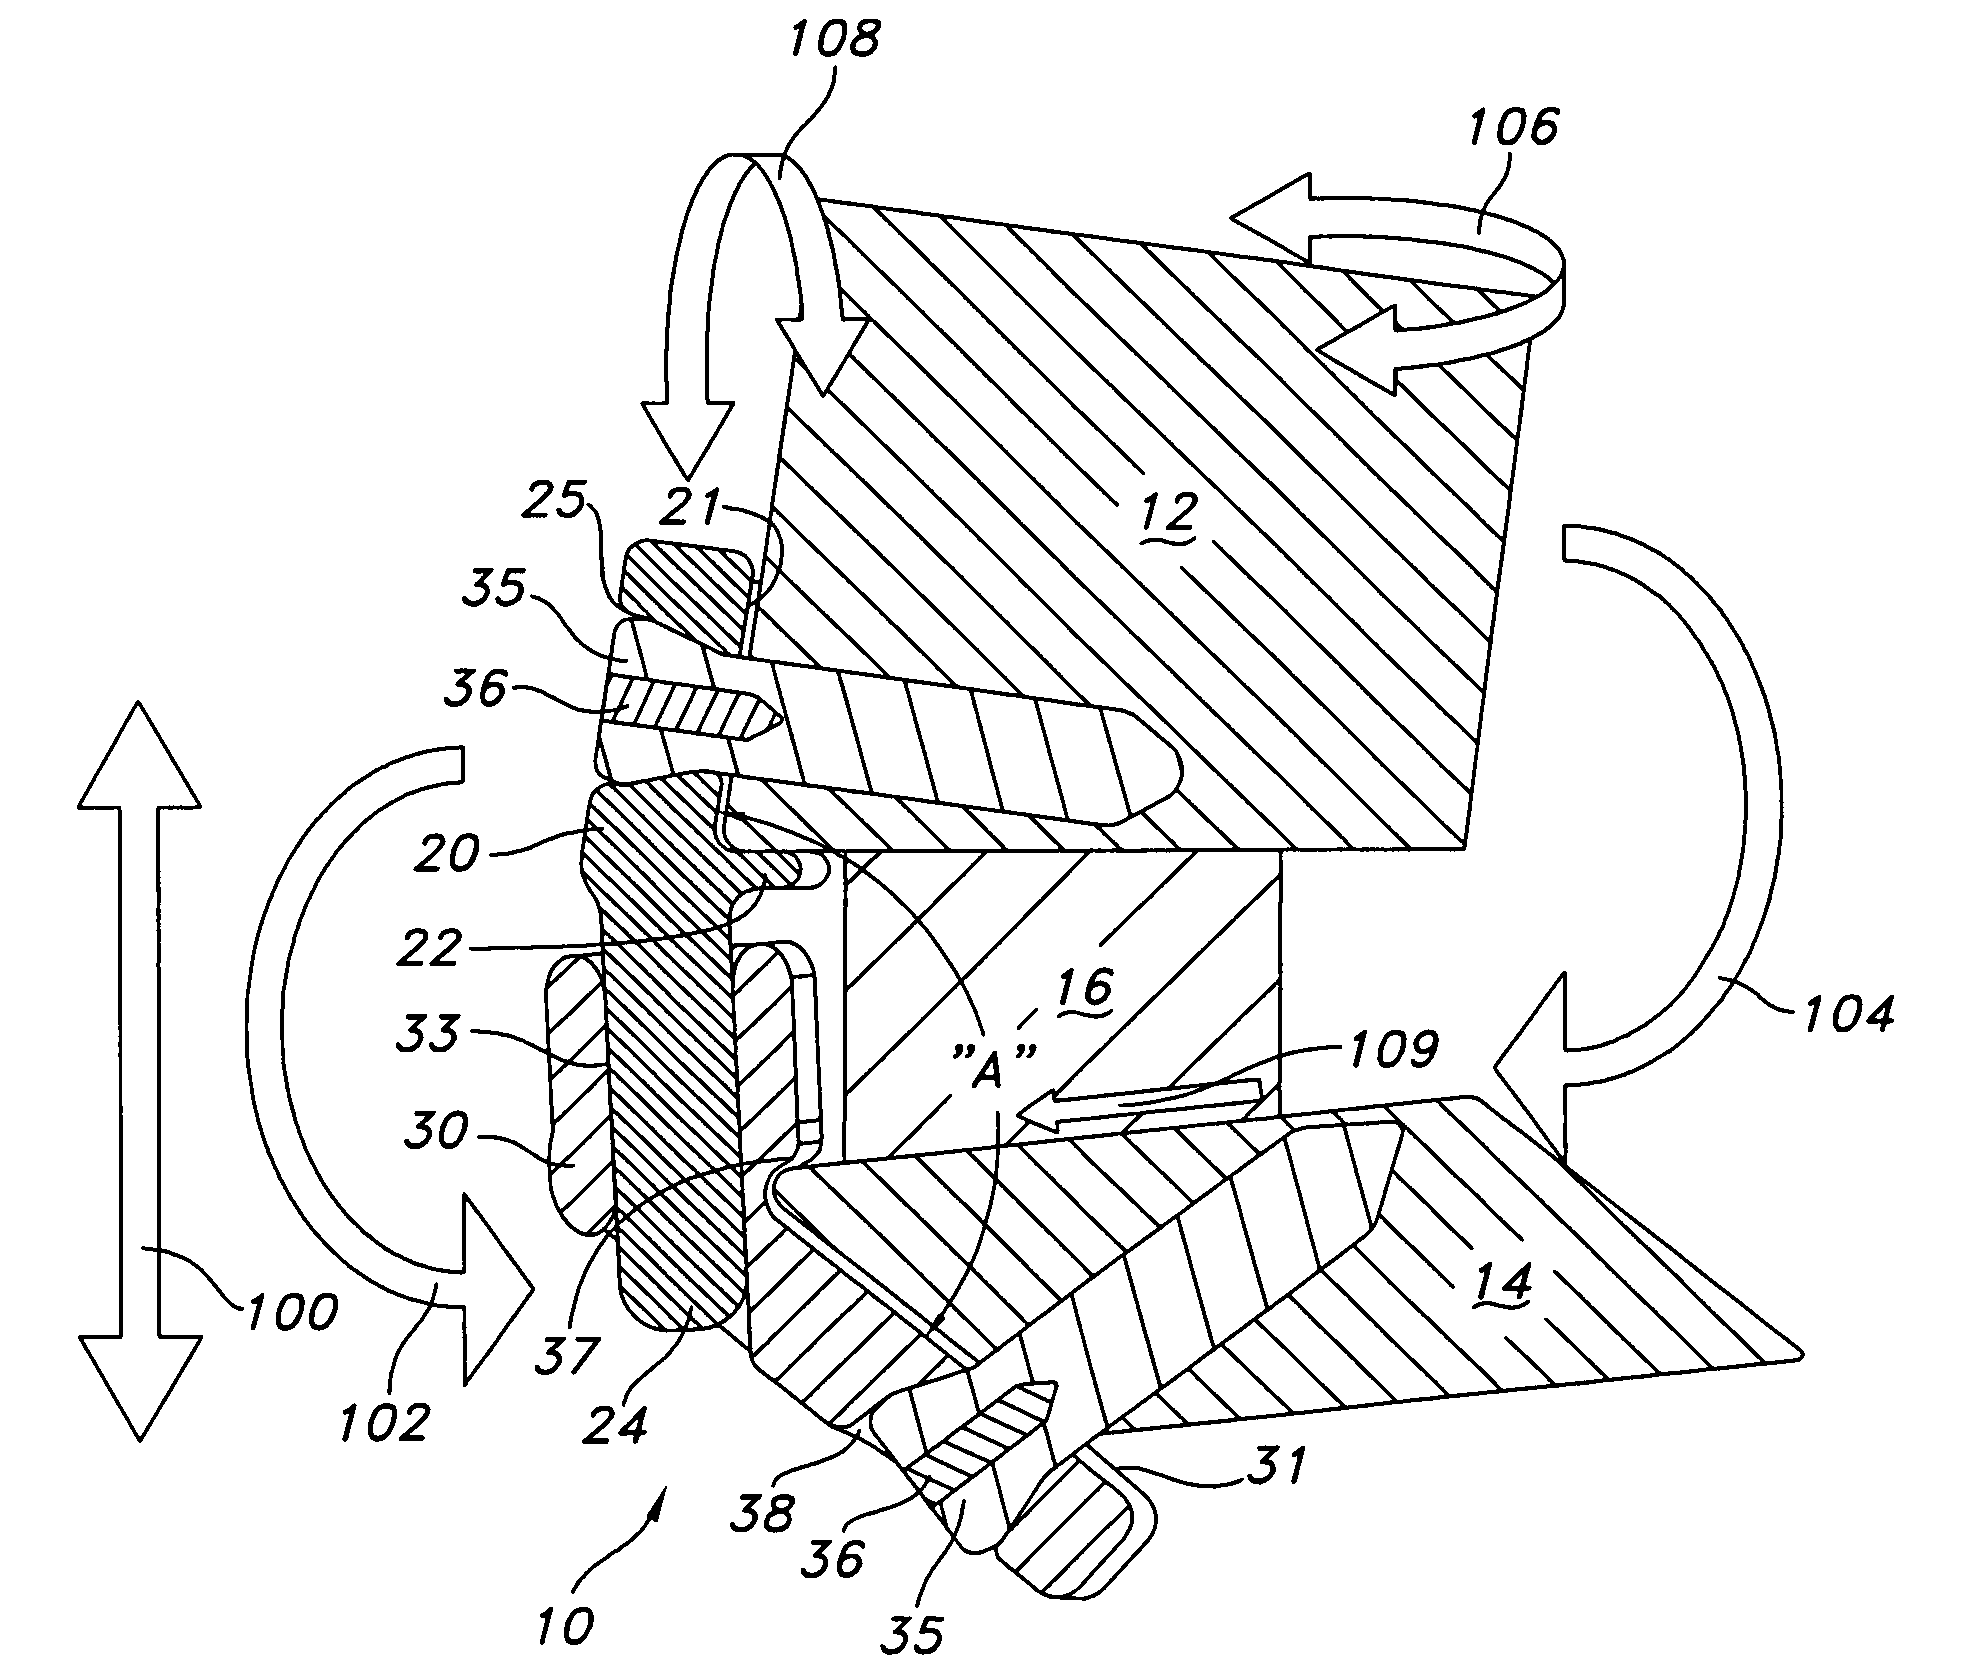 Dynamic stabilization device for anterior lower lumbar vertebral fusion